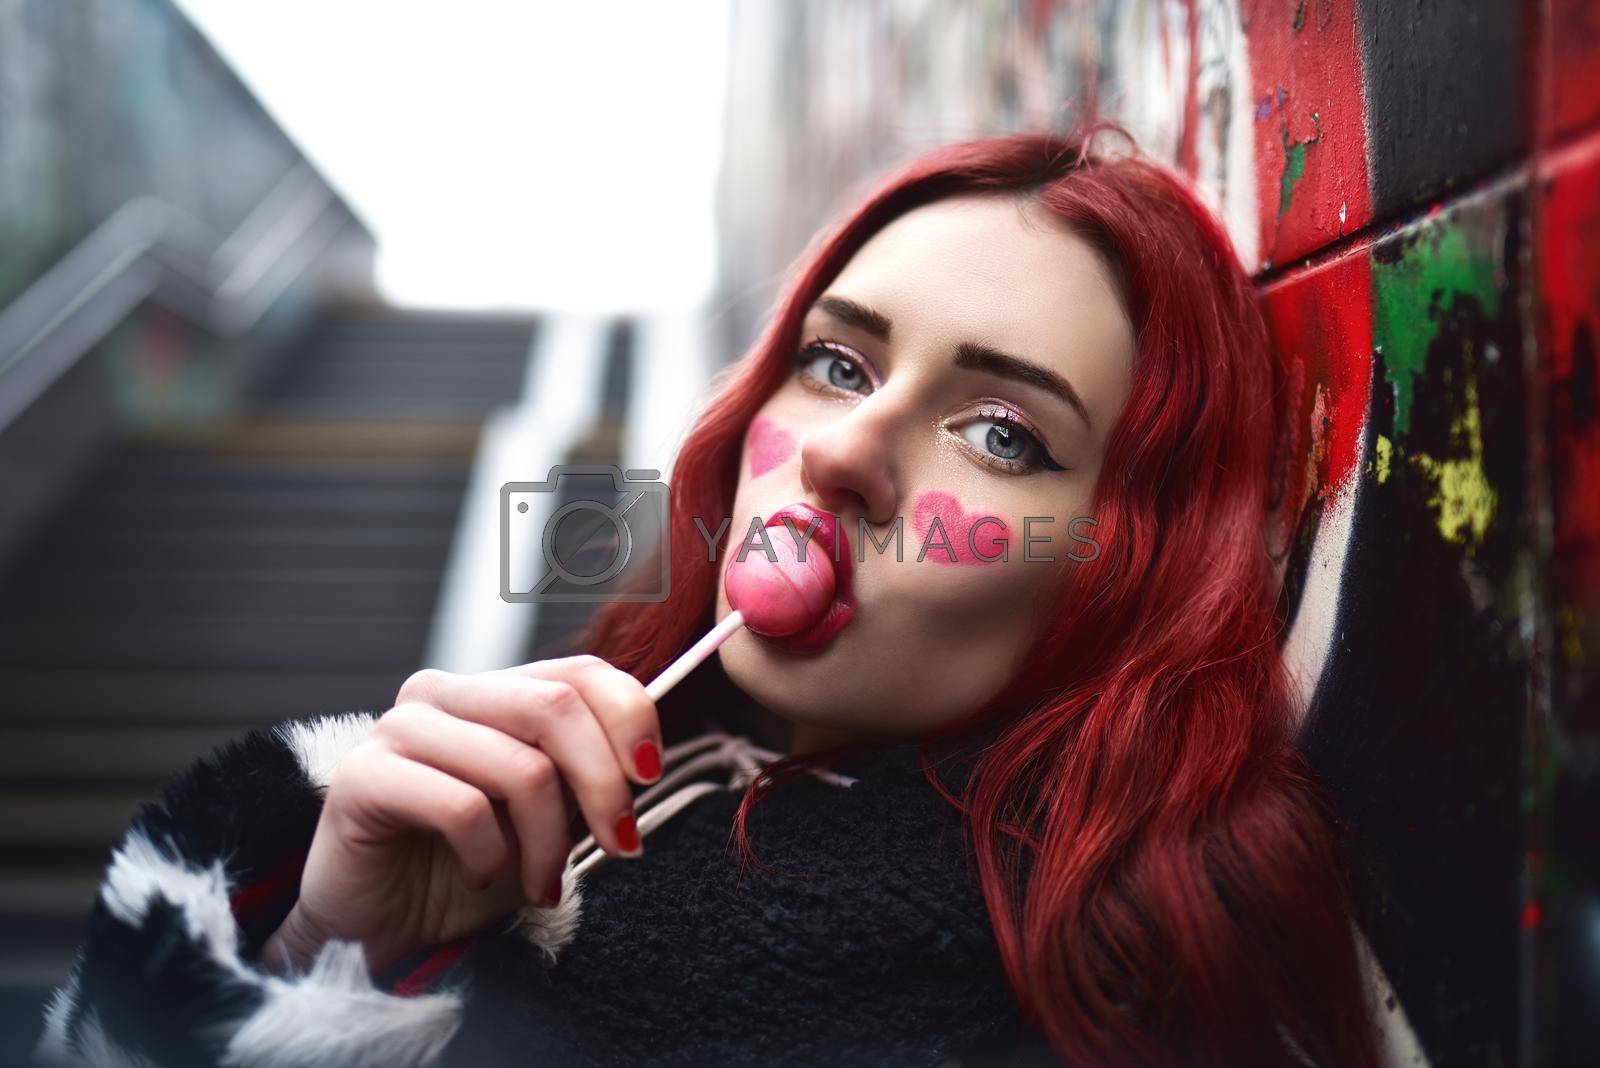 Royalty free image of A glamorous teenage girl with red hair licks a sweet strawberry candy near a wall of graffiti. by Nickstock